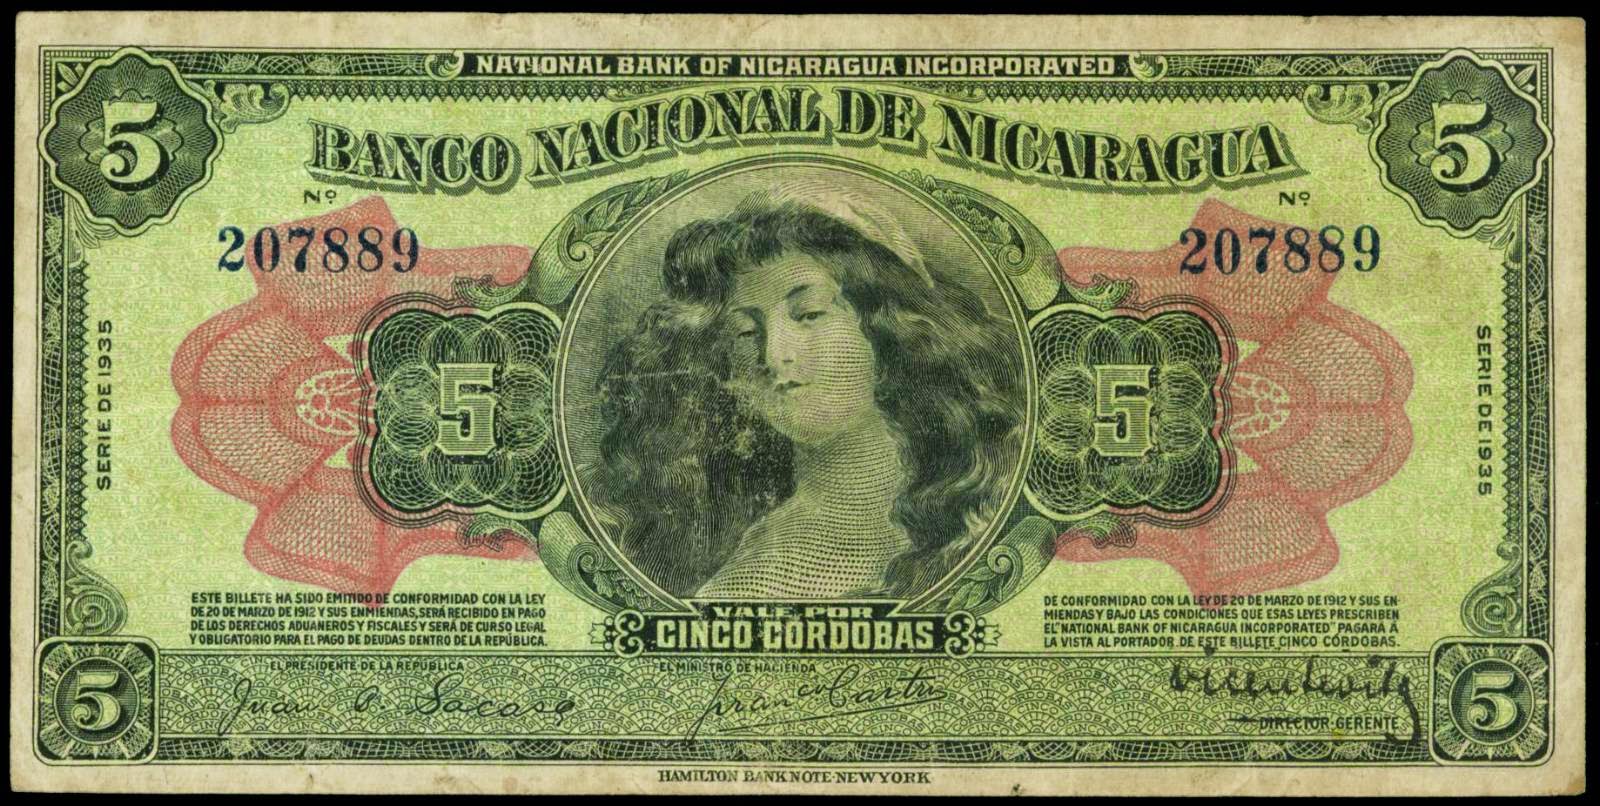 Nicaragua 5 Cordobas banknote 1935|World Banknotes & Coins Pictures | Old Money ...1600 x 806